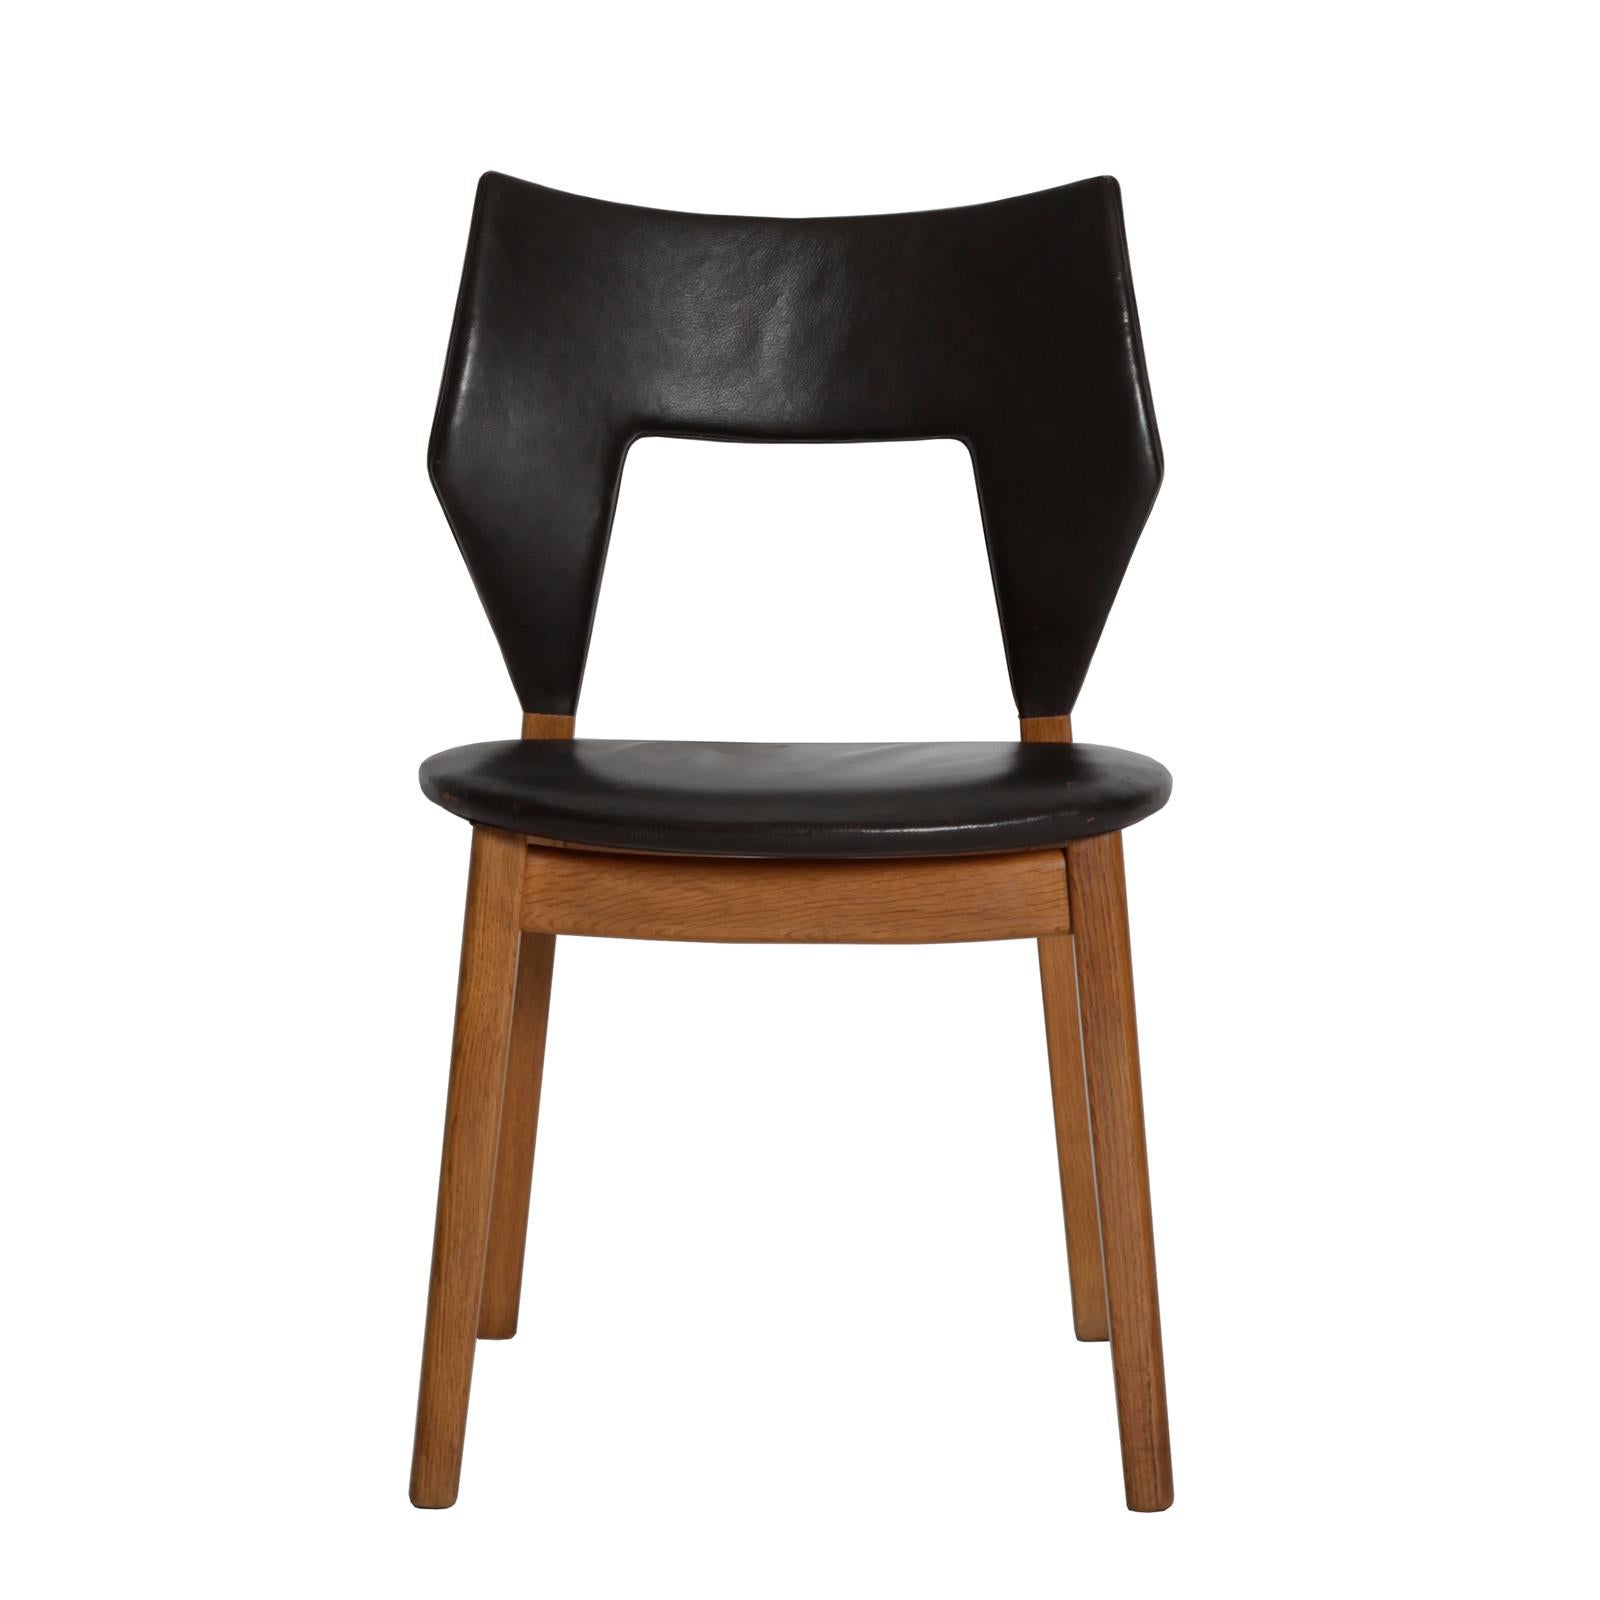 A sculptural and well crafted side chair in solid oak with original dark brown leather upholstery
Designed by Tove and Edvard Kindt-Larsen in 1960. Made by master cabinetmaker Thorald Madsen, Denmark.